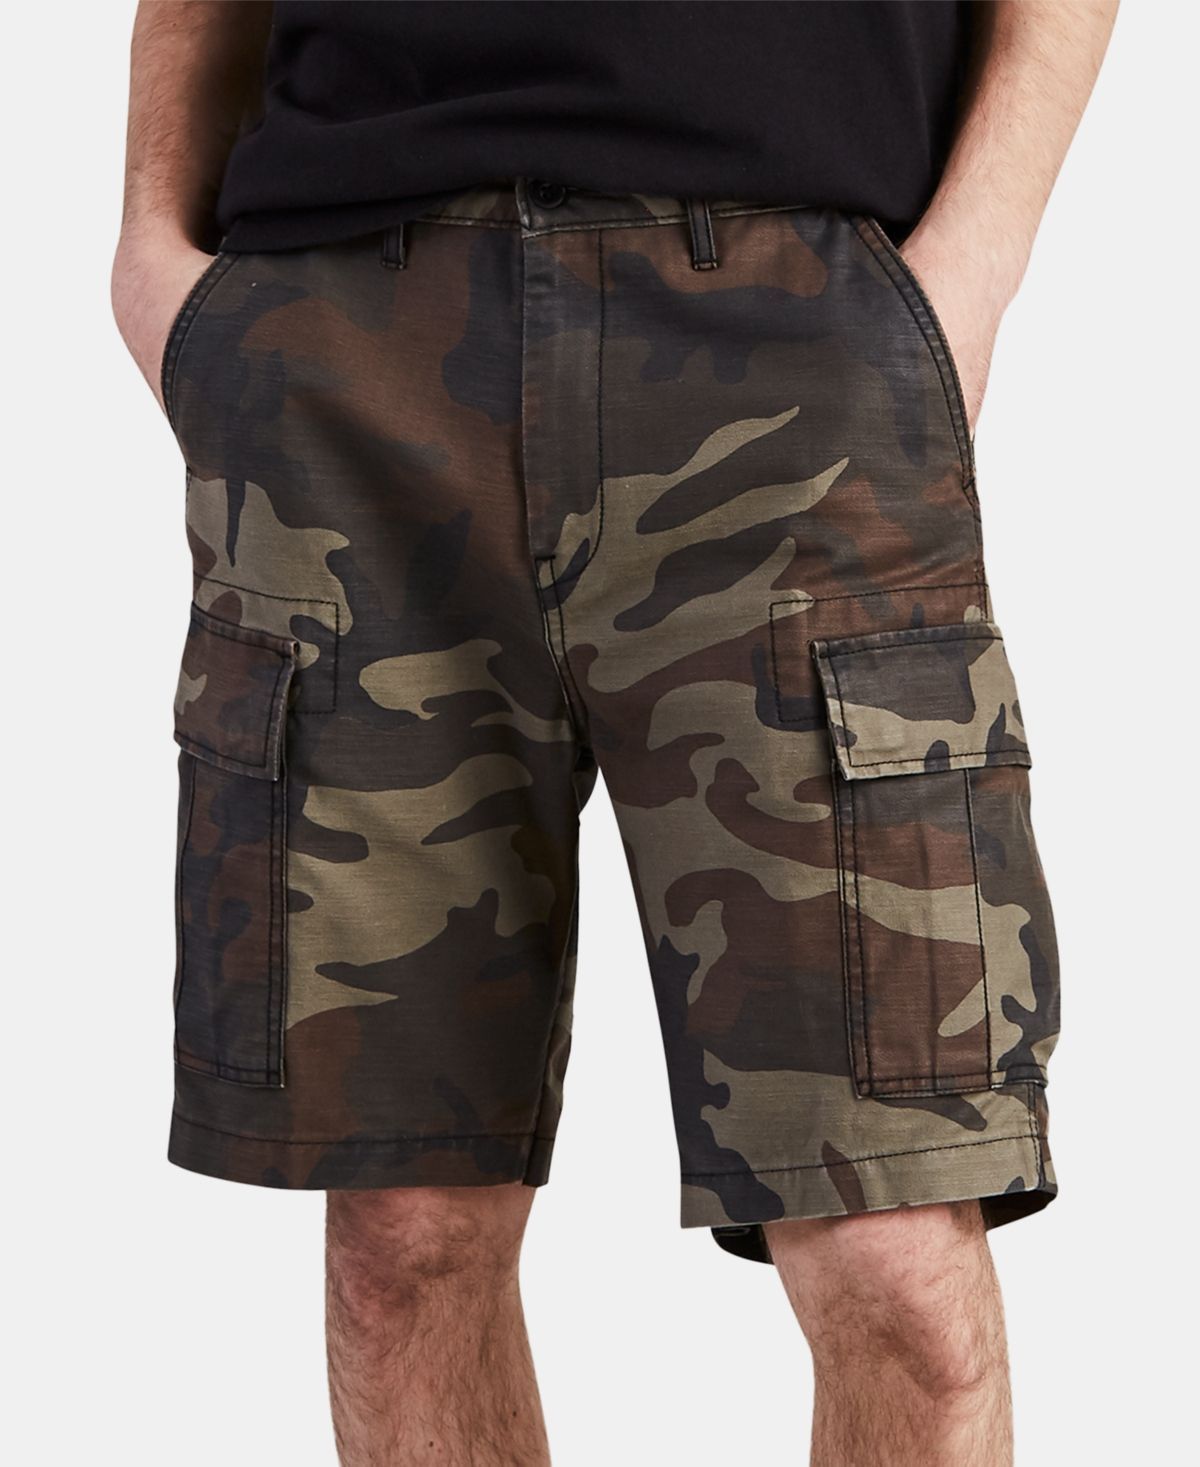 Levi's Men's Carrier Loose-Fit Cargo Shorts  & Reviews - Shorts - Men - Macy's - Levi's Men's Carrier Loose-Fit Cargo Shorts  & Reviews - Shorts - Men - Macy's -   14 fitness Outfits for men ideas